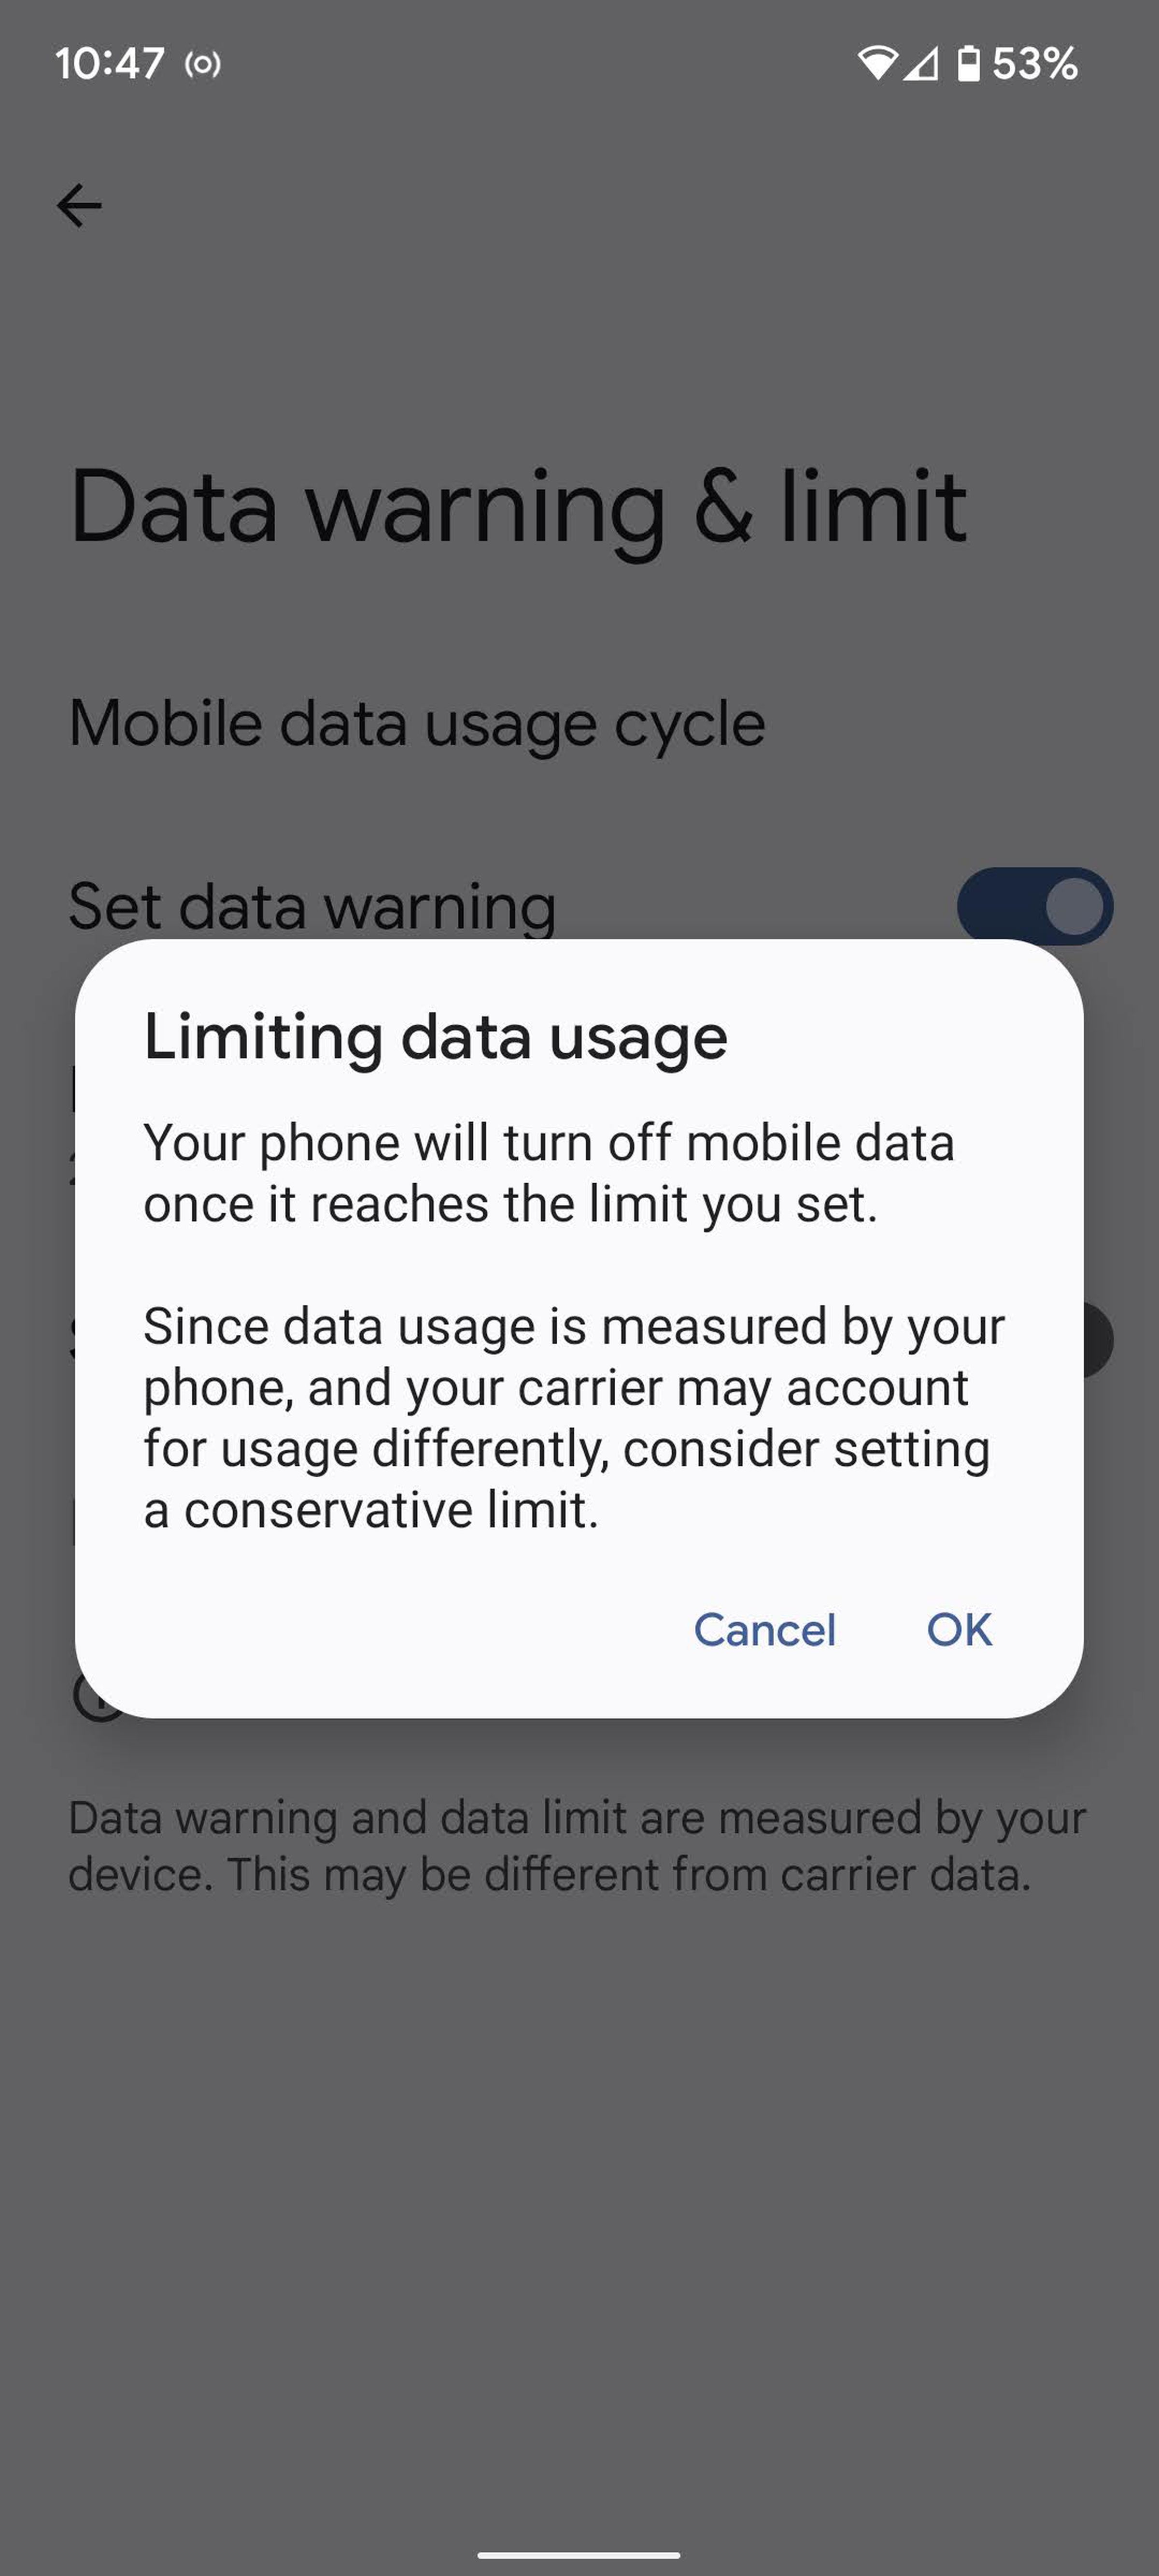 You can also limit data usage.